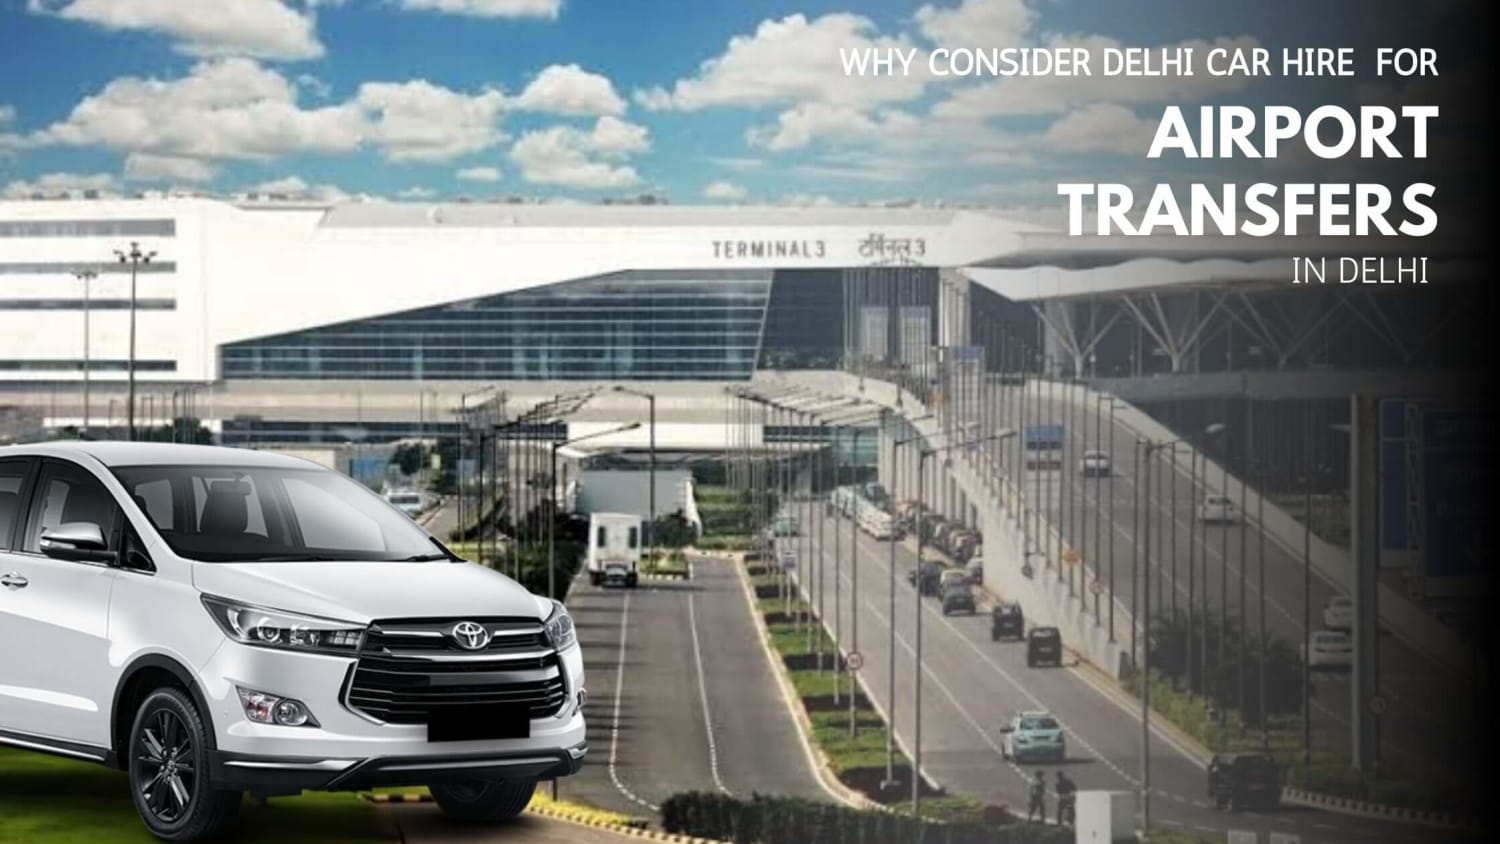 Why consider DCH service for Airport Transfer in Delhi?